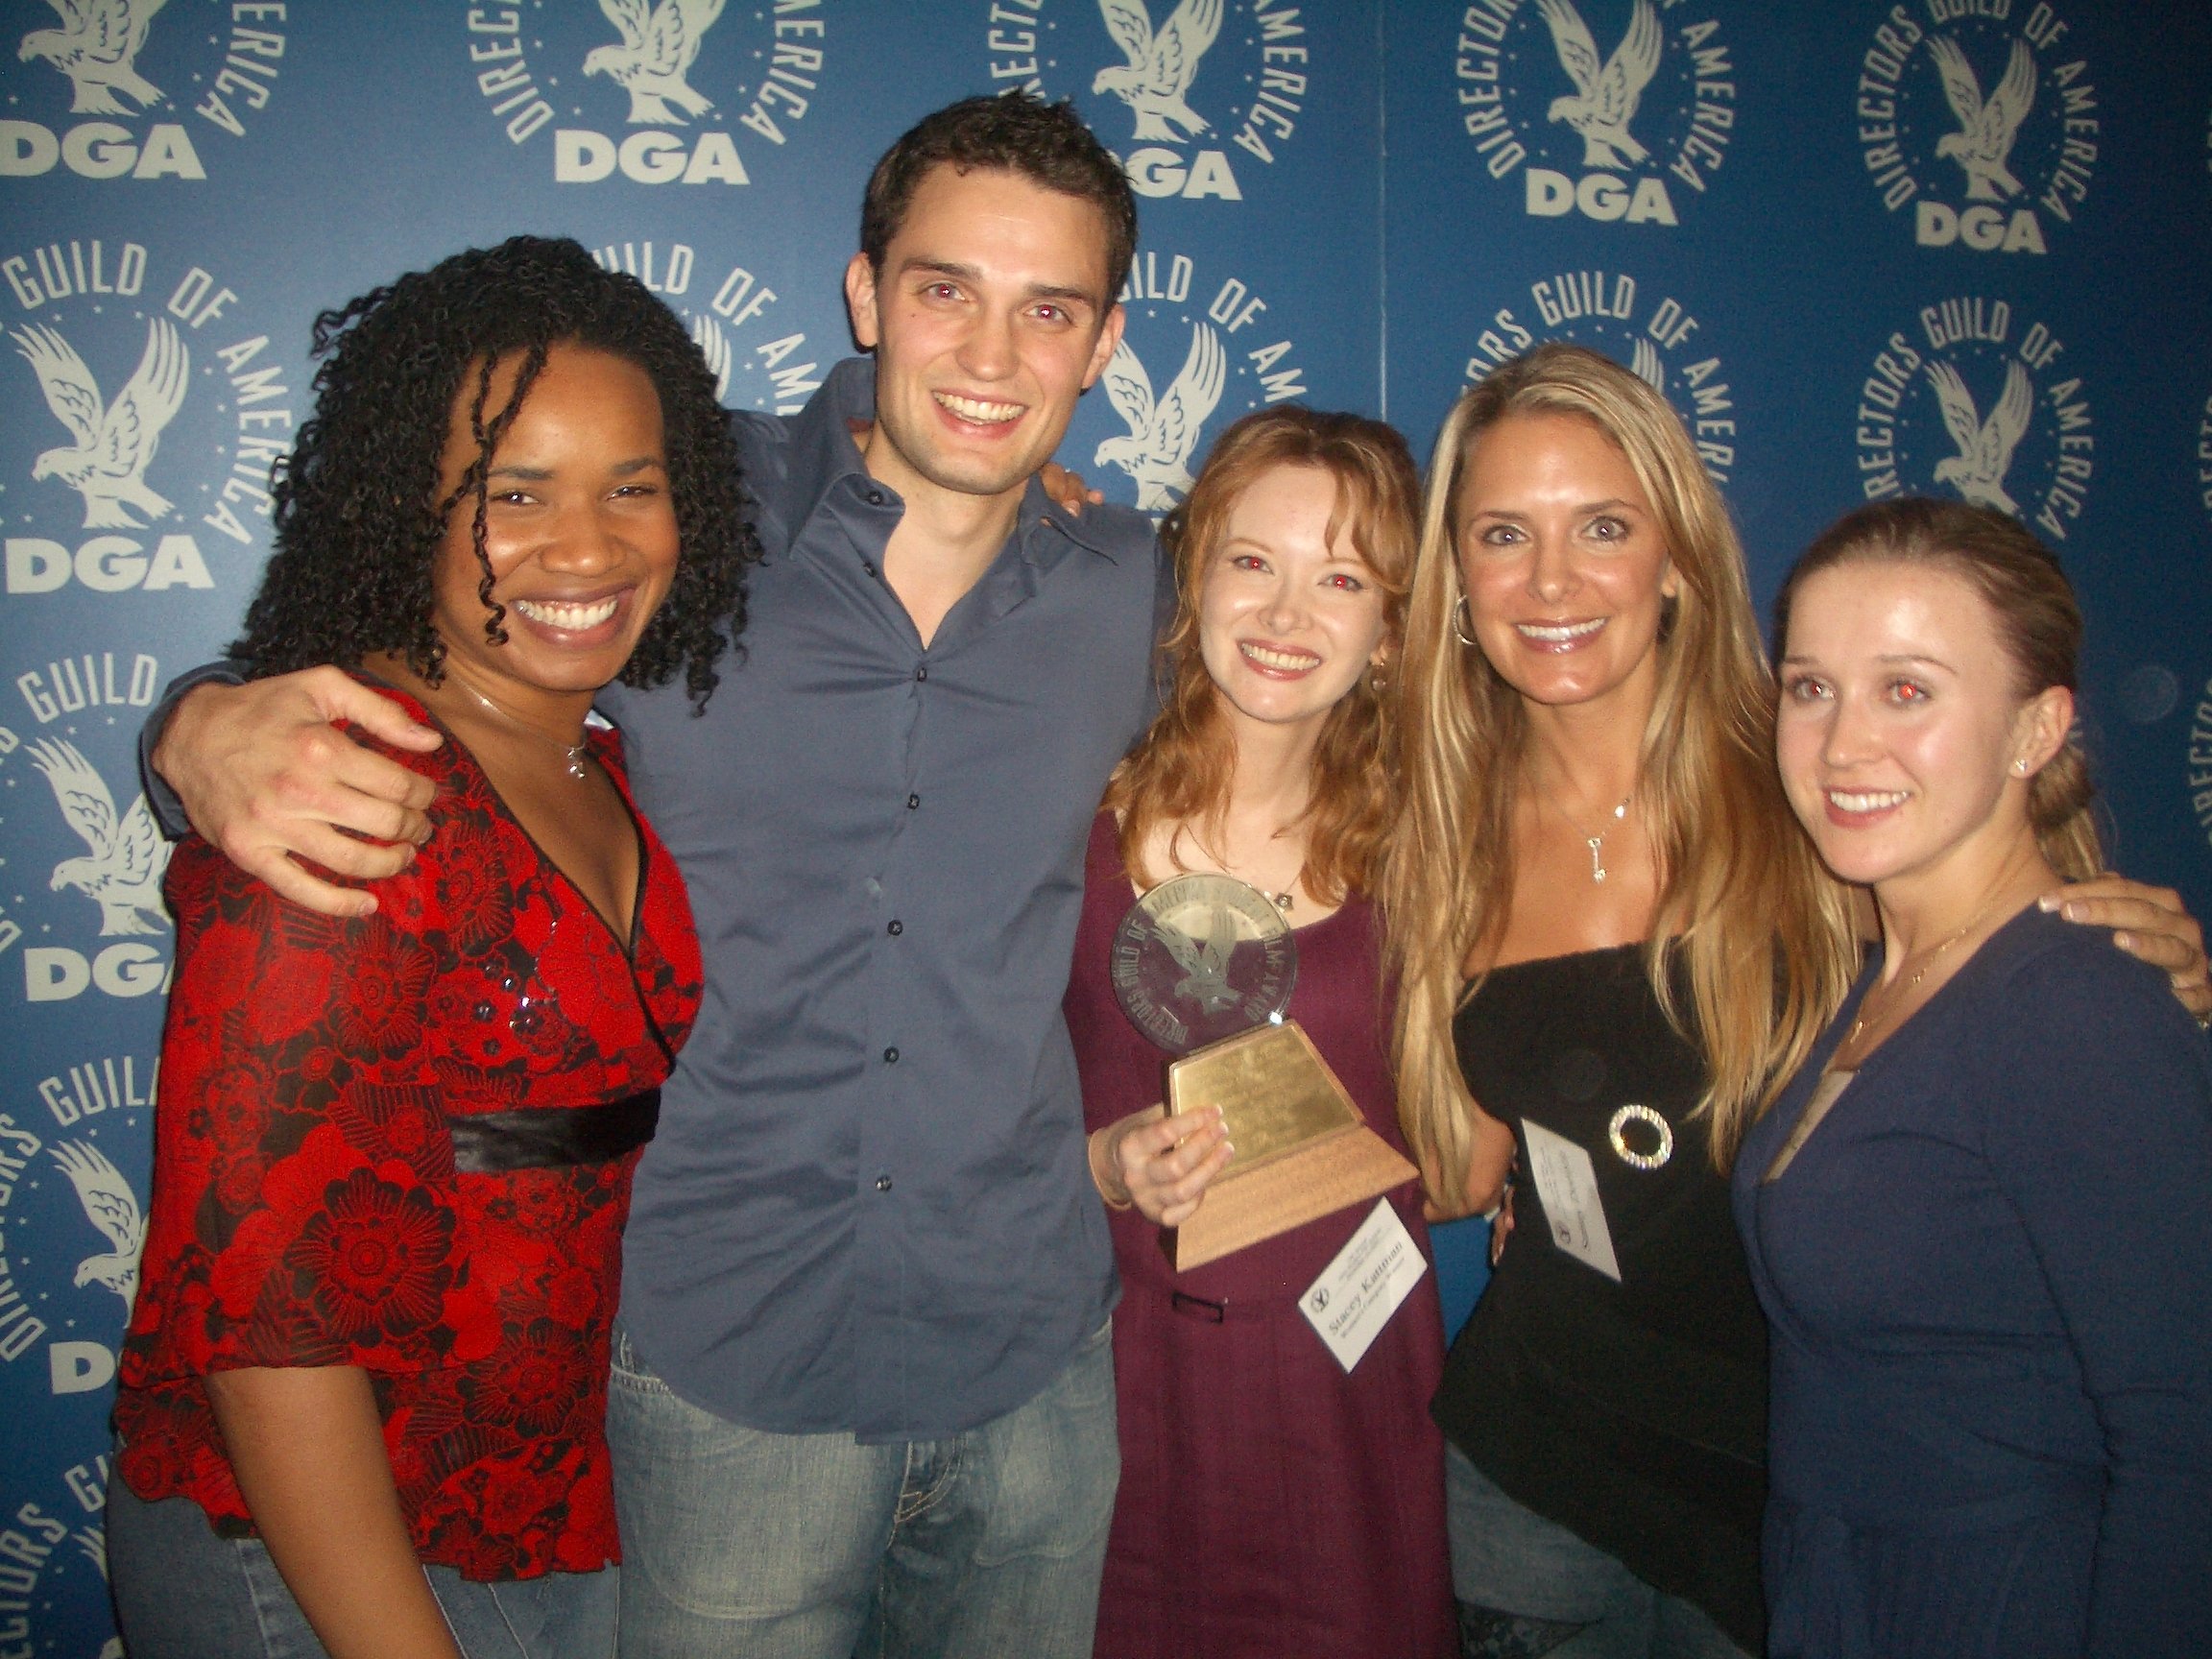 Sunny Doench with Stacey Kattman (Director) and the cast receiving the DGA Grand Prize Award